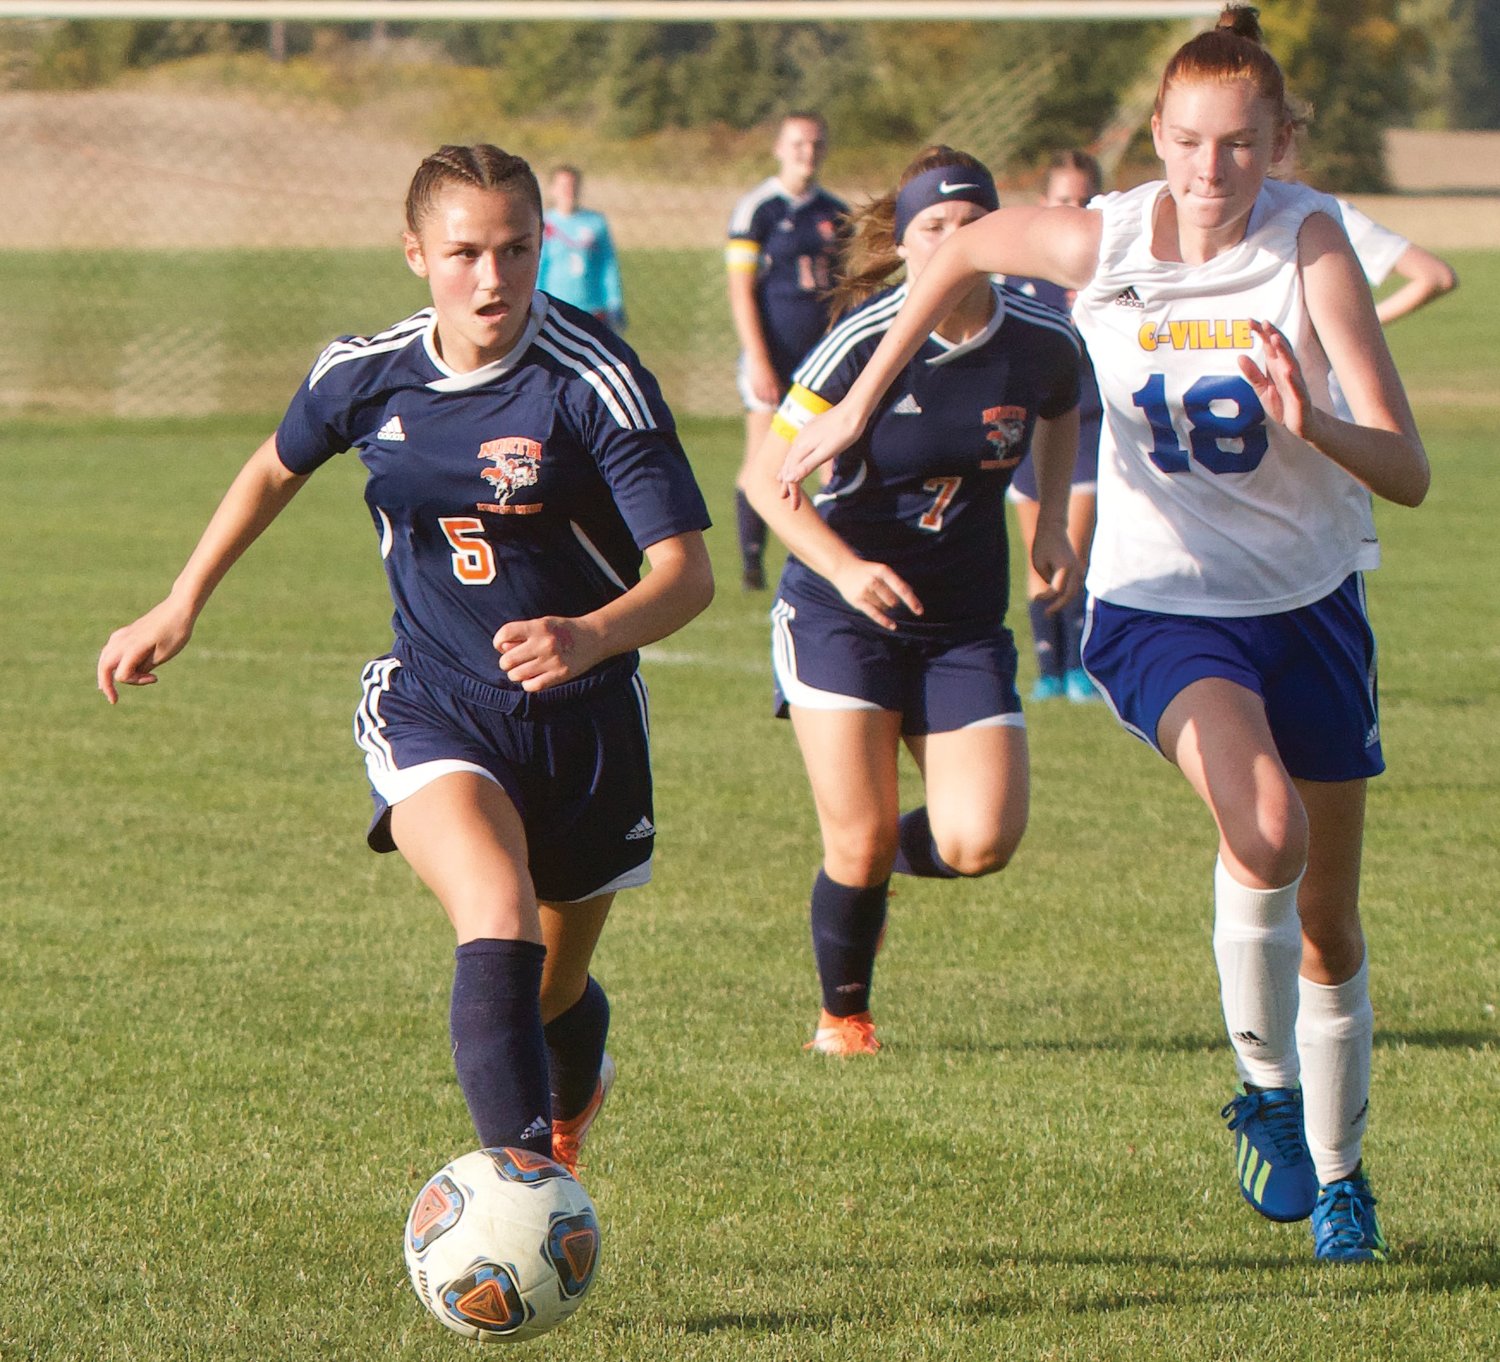 North Montgomery’s Teegan Bacon scored a school record 22 goals for the Chargers in 2020.